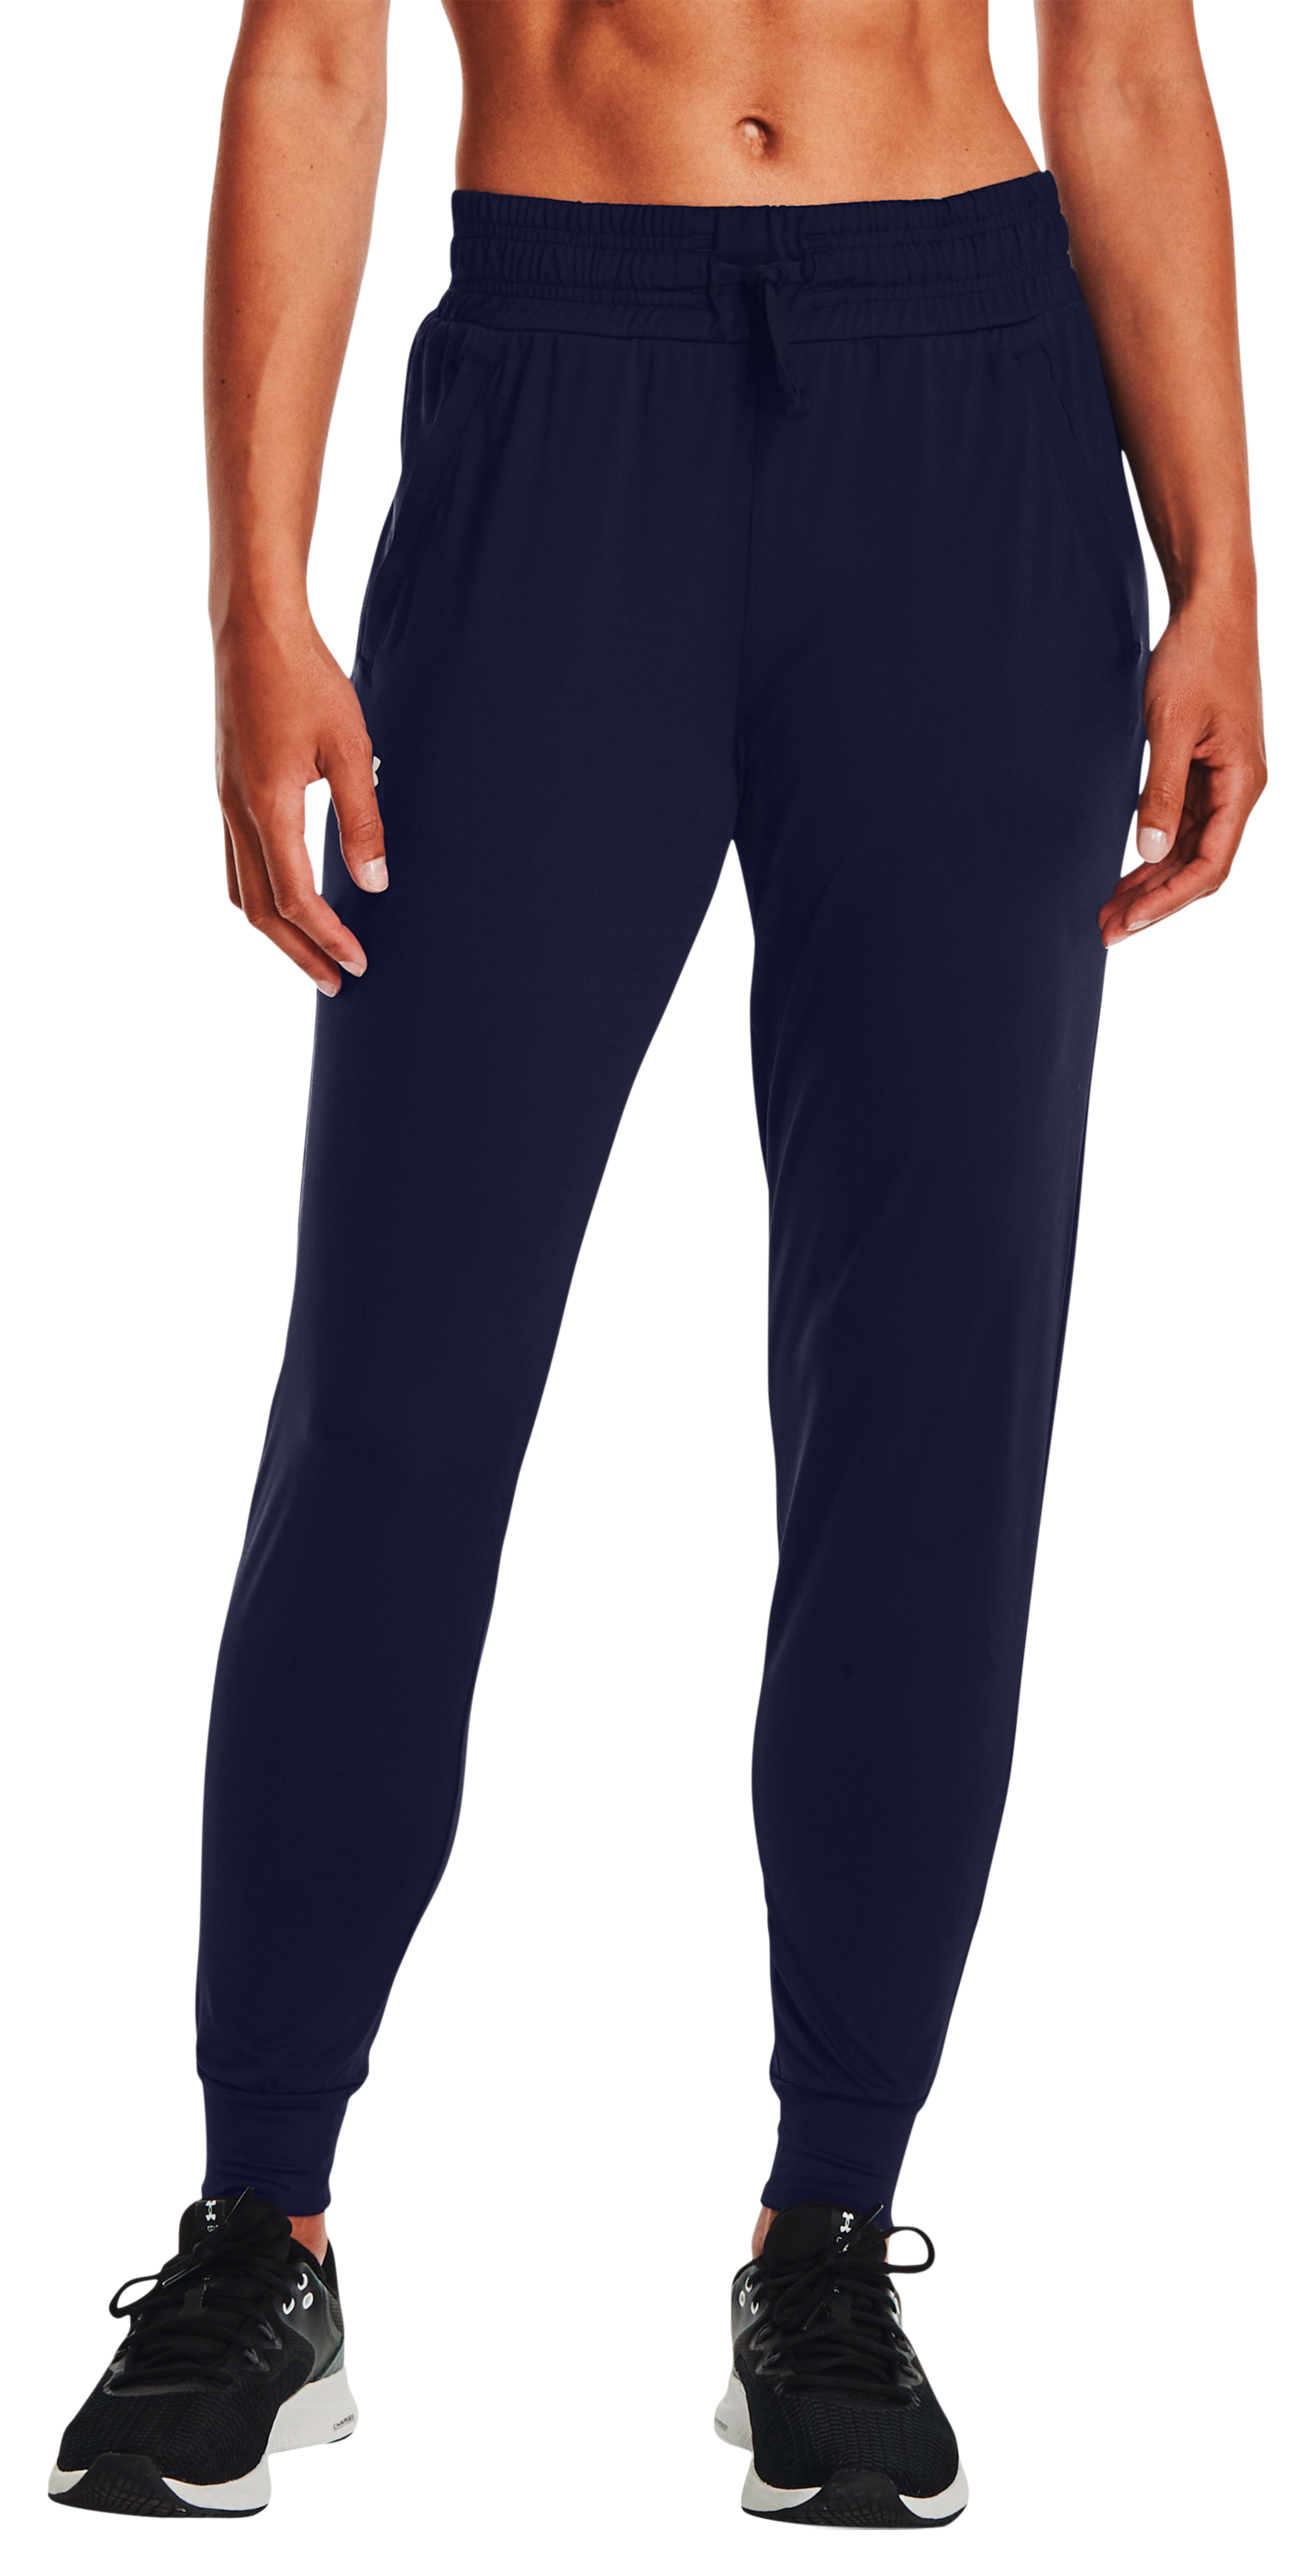 Under Armour HeatGear Armour Pants for Ladies - Midnight Navy/White - M - Short